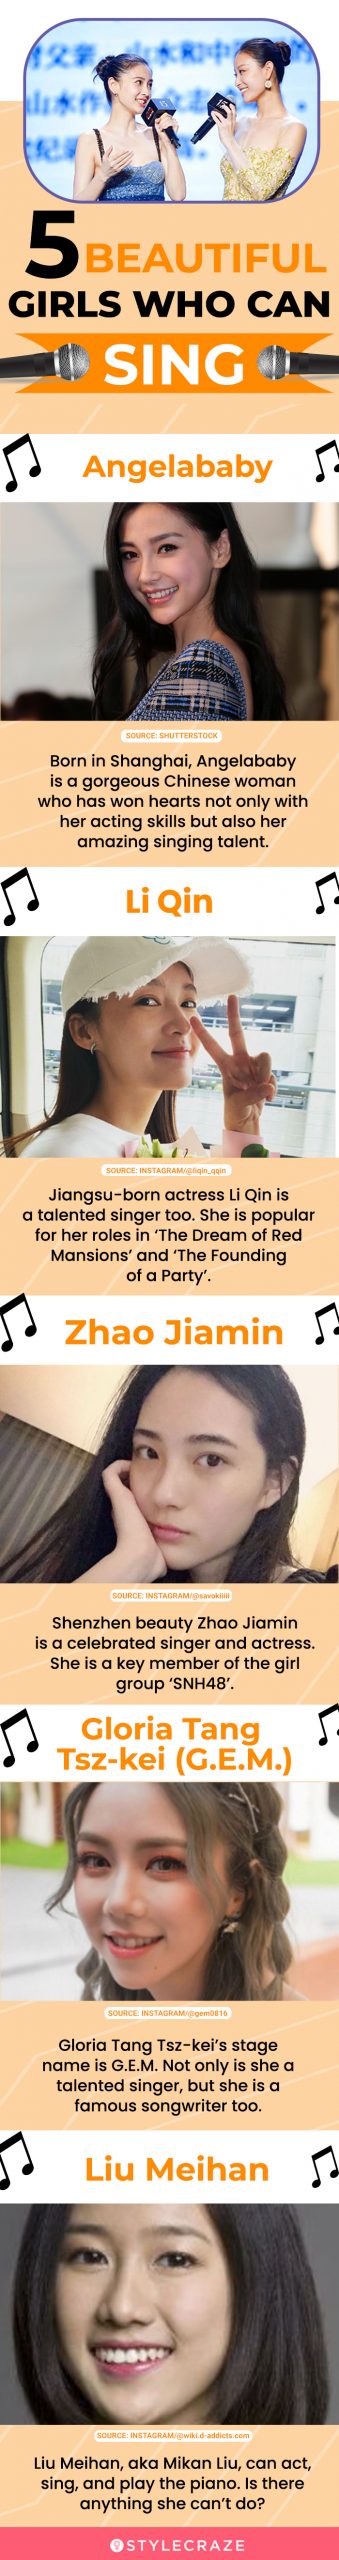 5 beautiful girls who can sing (infographic)